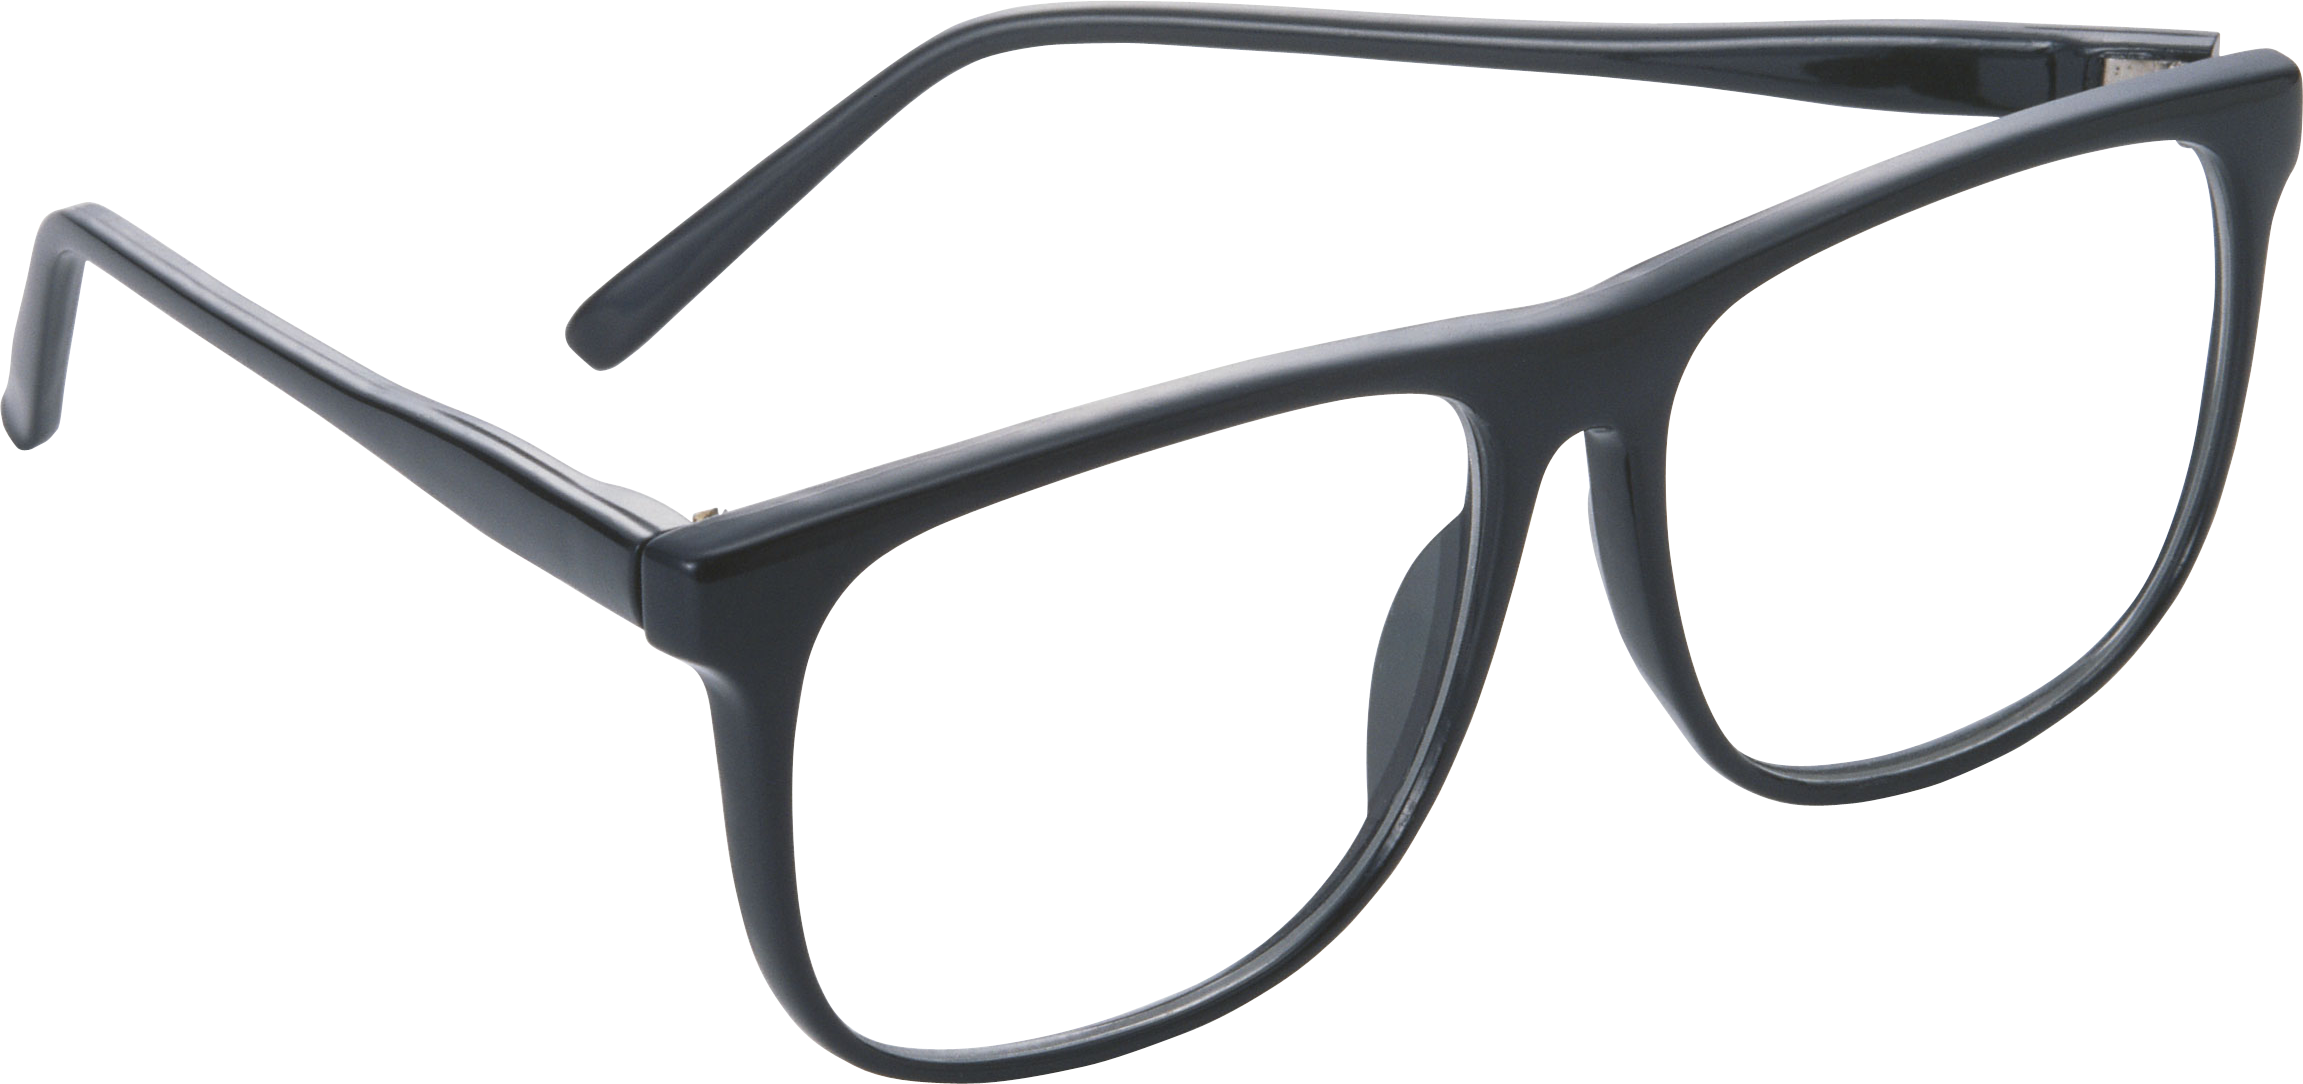 Spectacles Glasses - glasses PNG image png download - 2303*1084 - Free